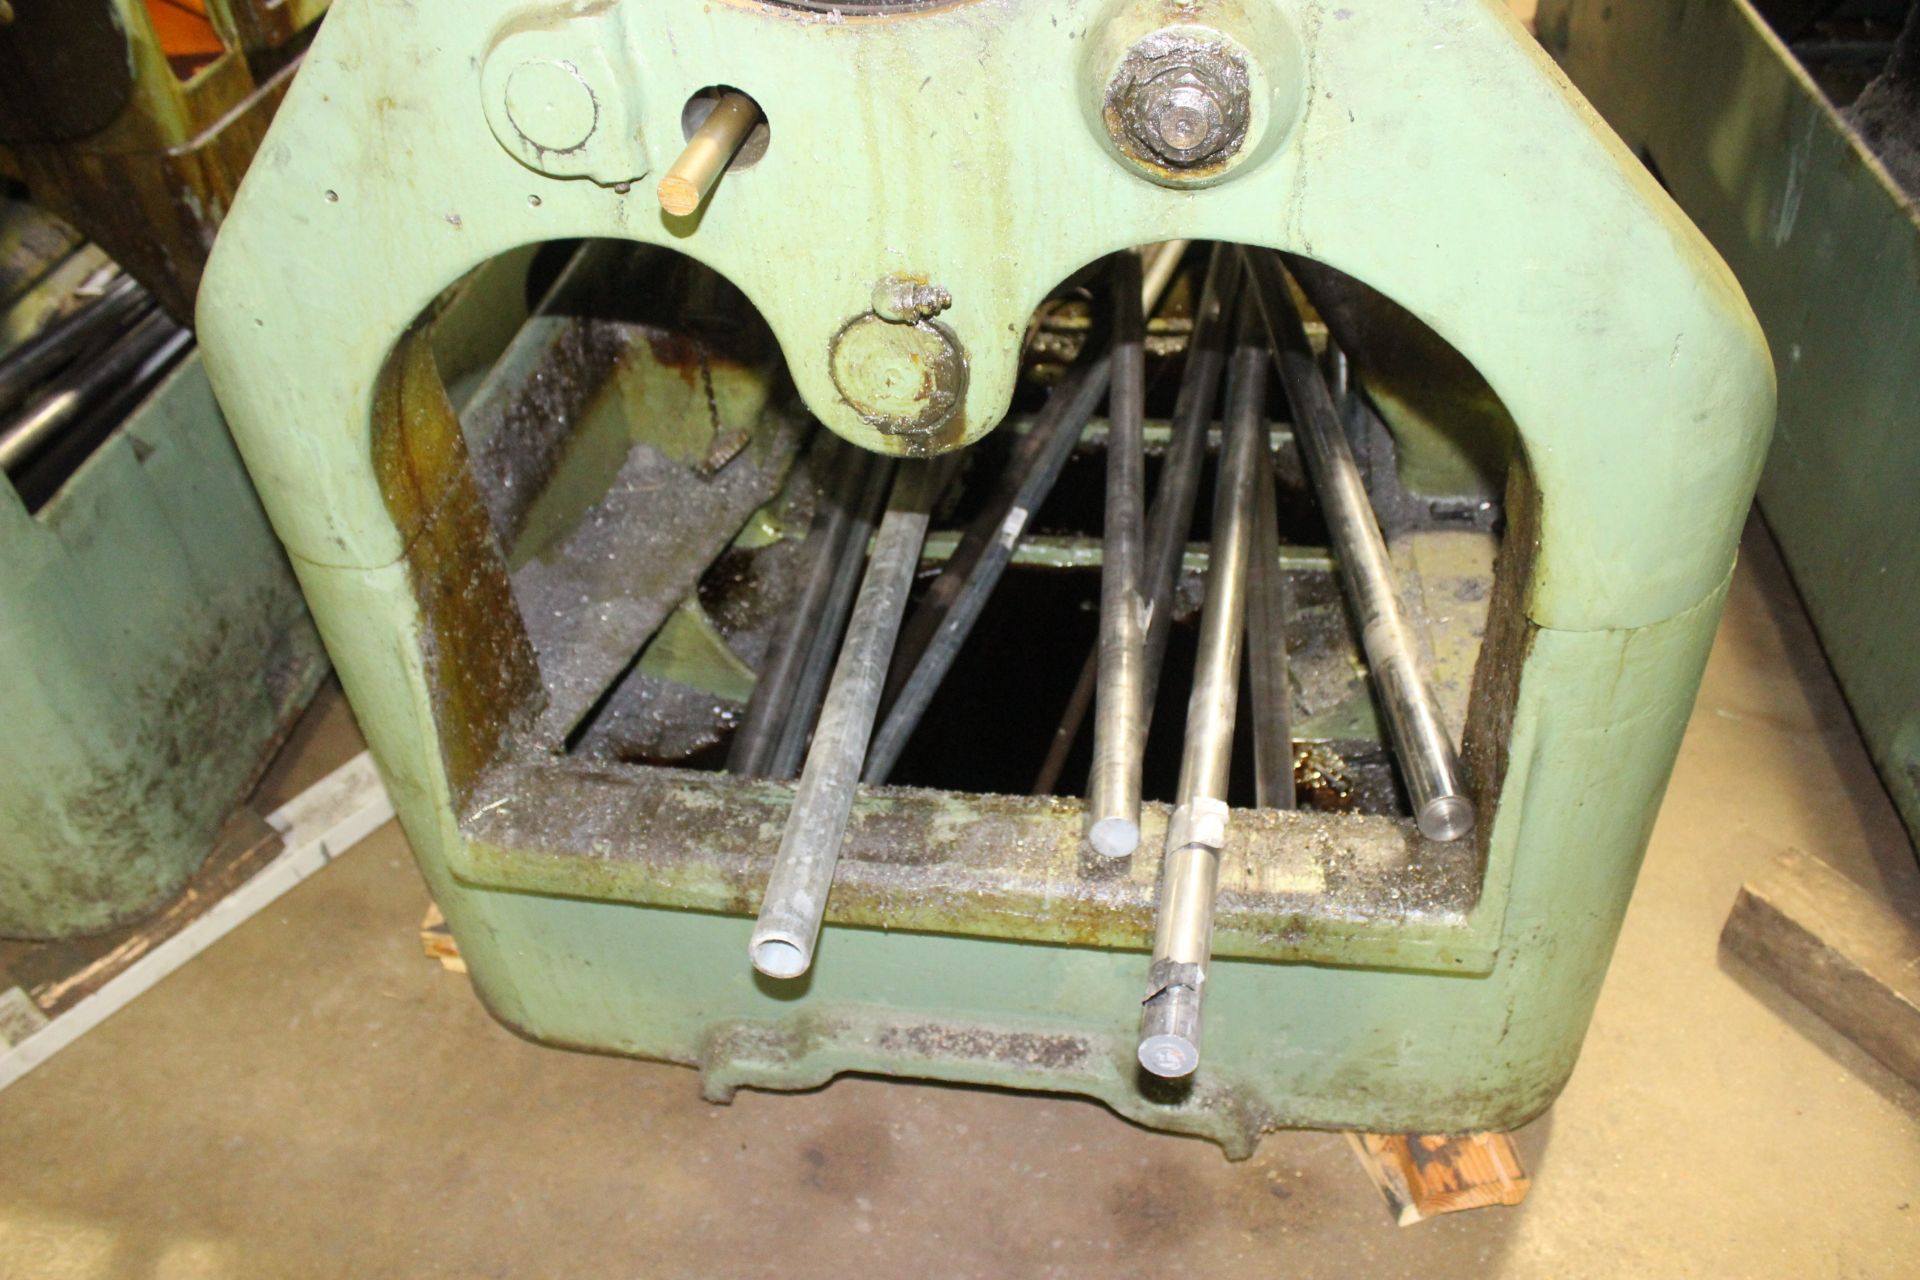 Acme Gridley 1-1/4” 6 Spindle Model RA-6 Screw Machines, s/n 71628-Parts Machine - Image 3 of 6